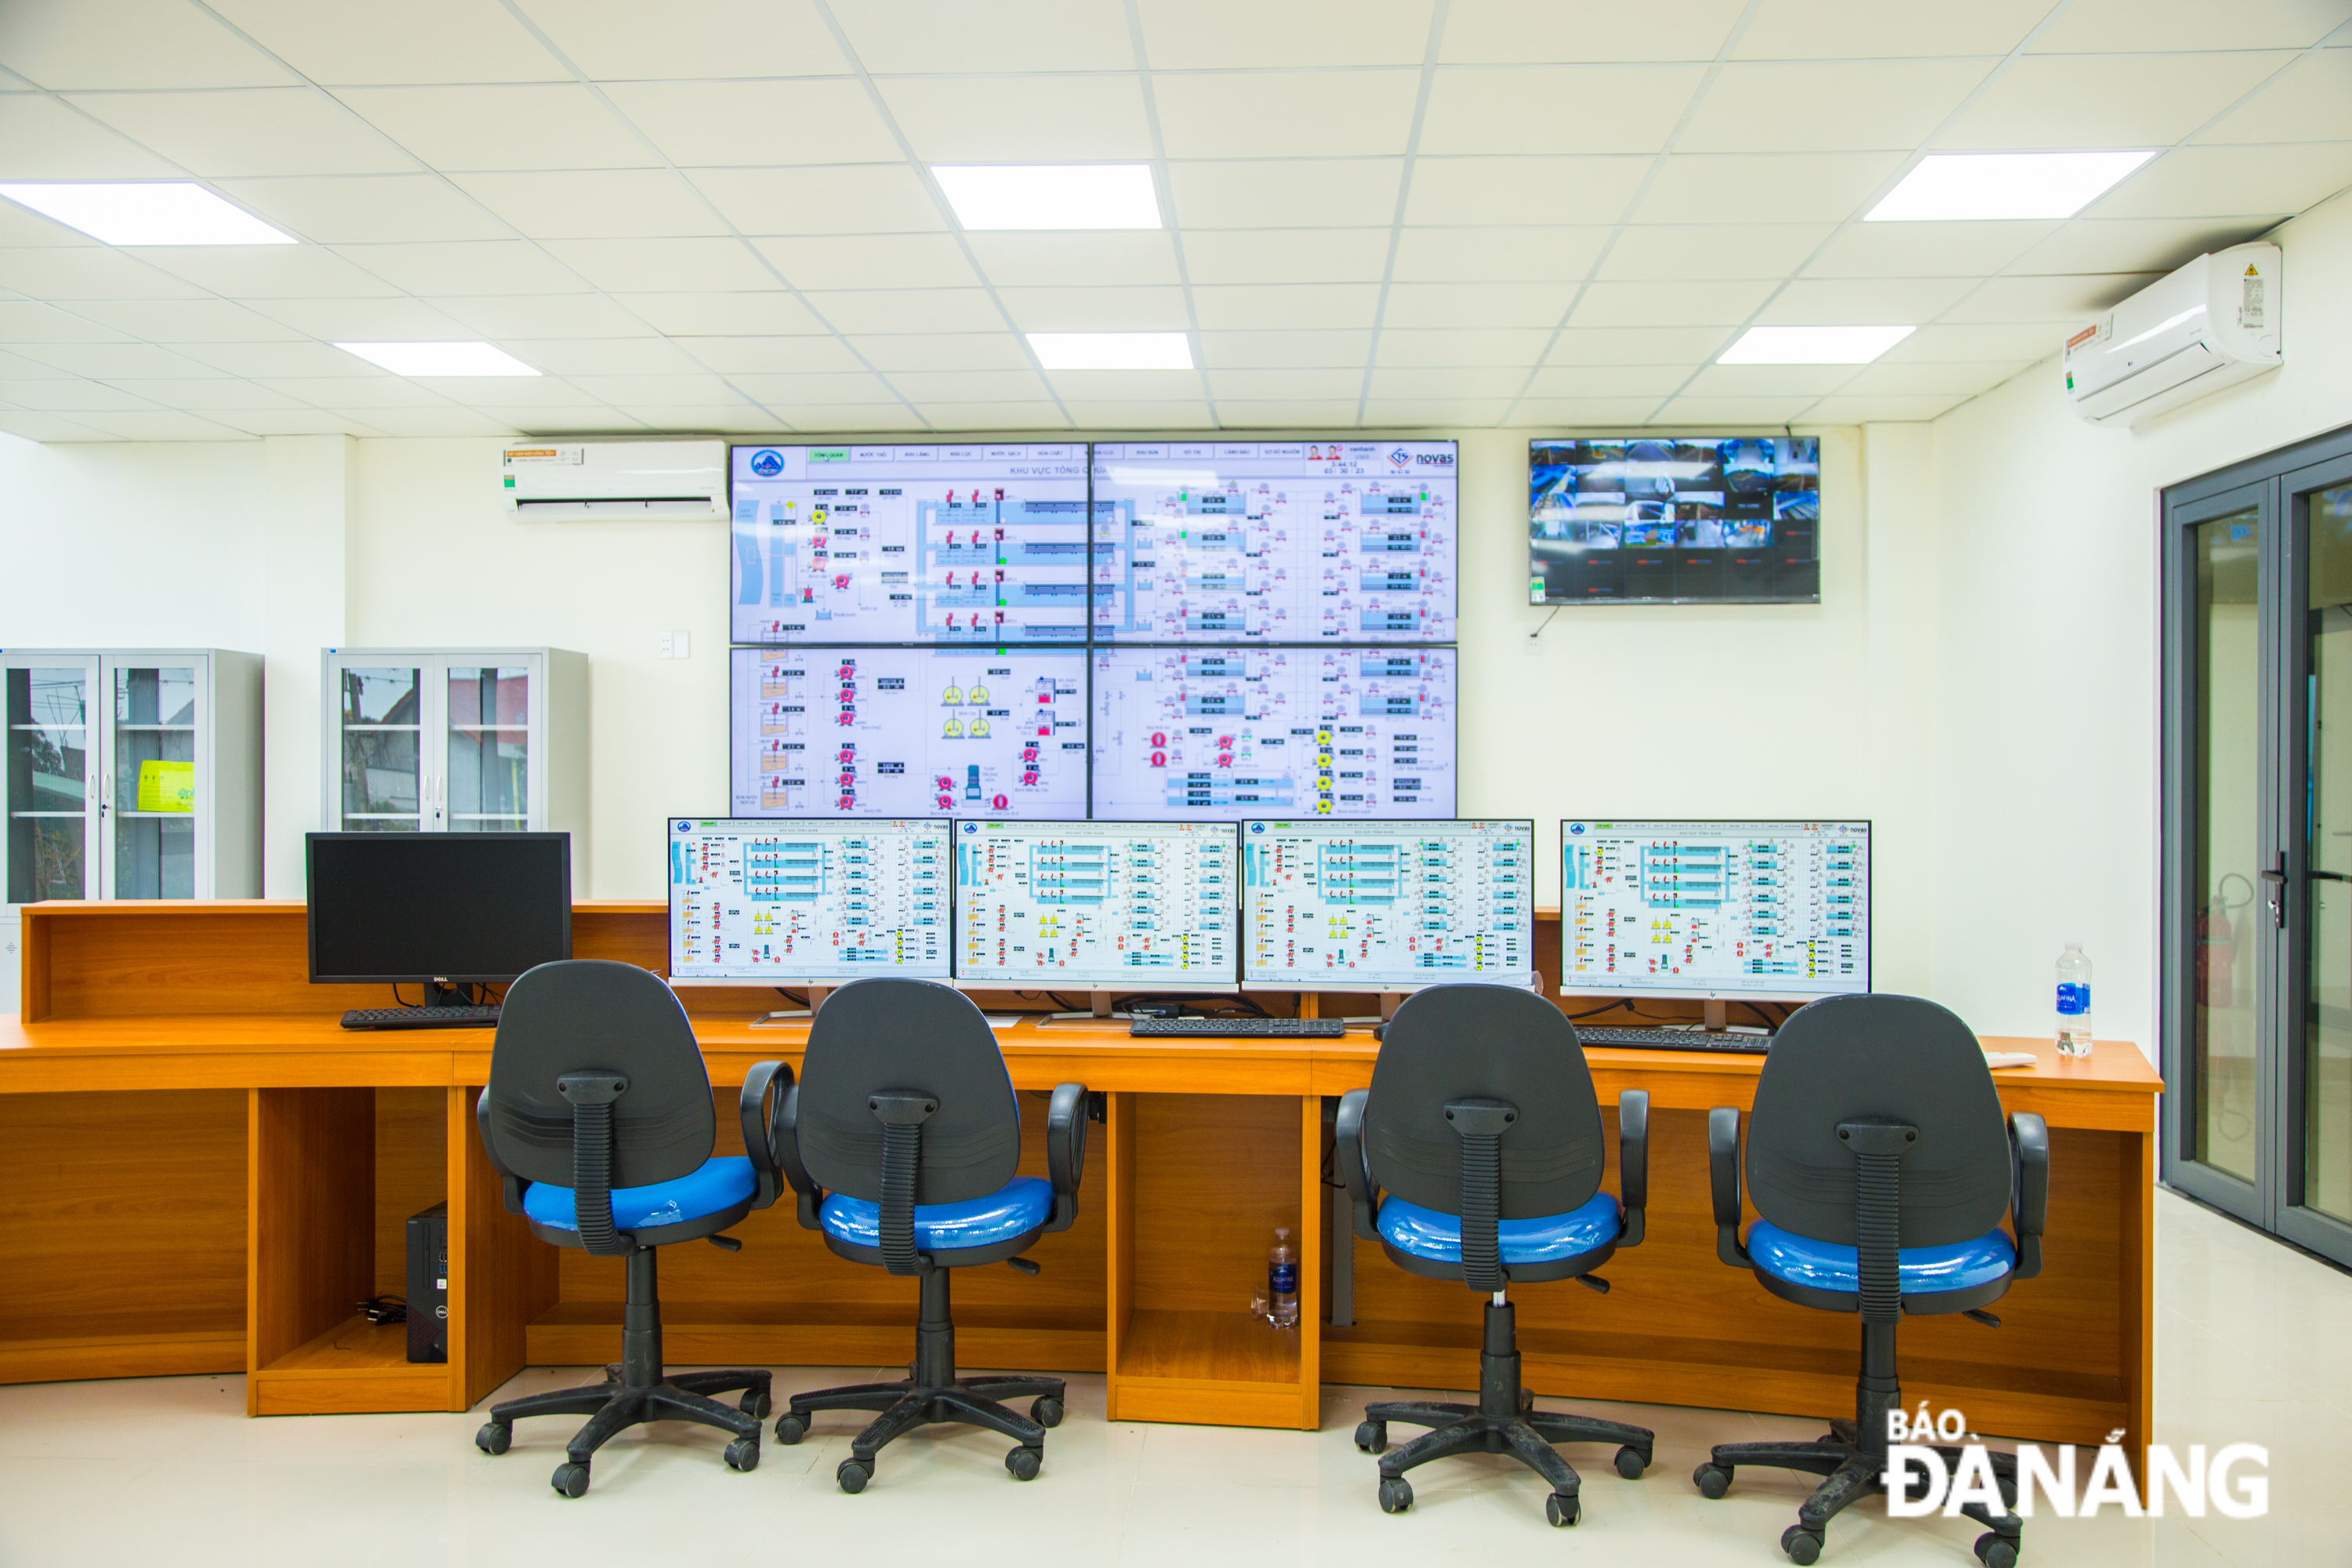 The central control room of the Hoa Lien Water Plant is equipped with a modern system